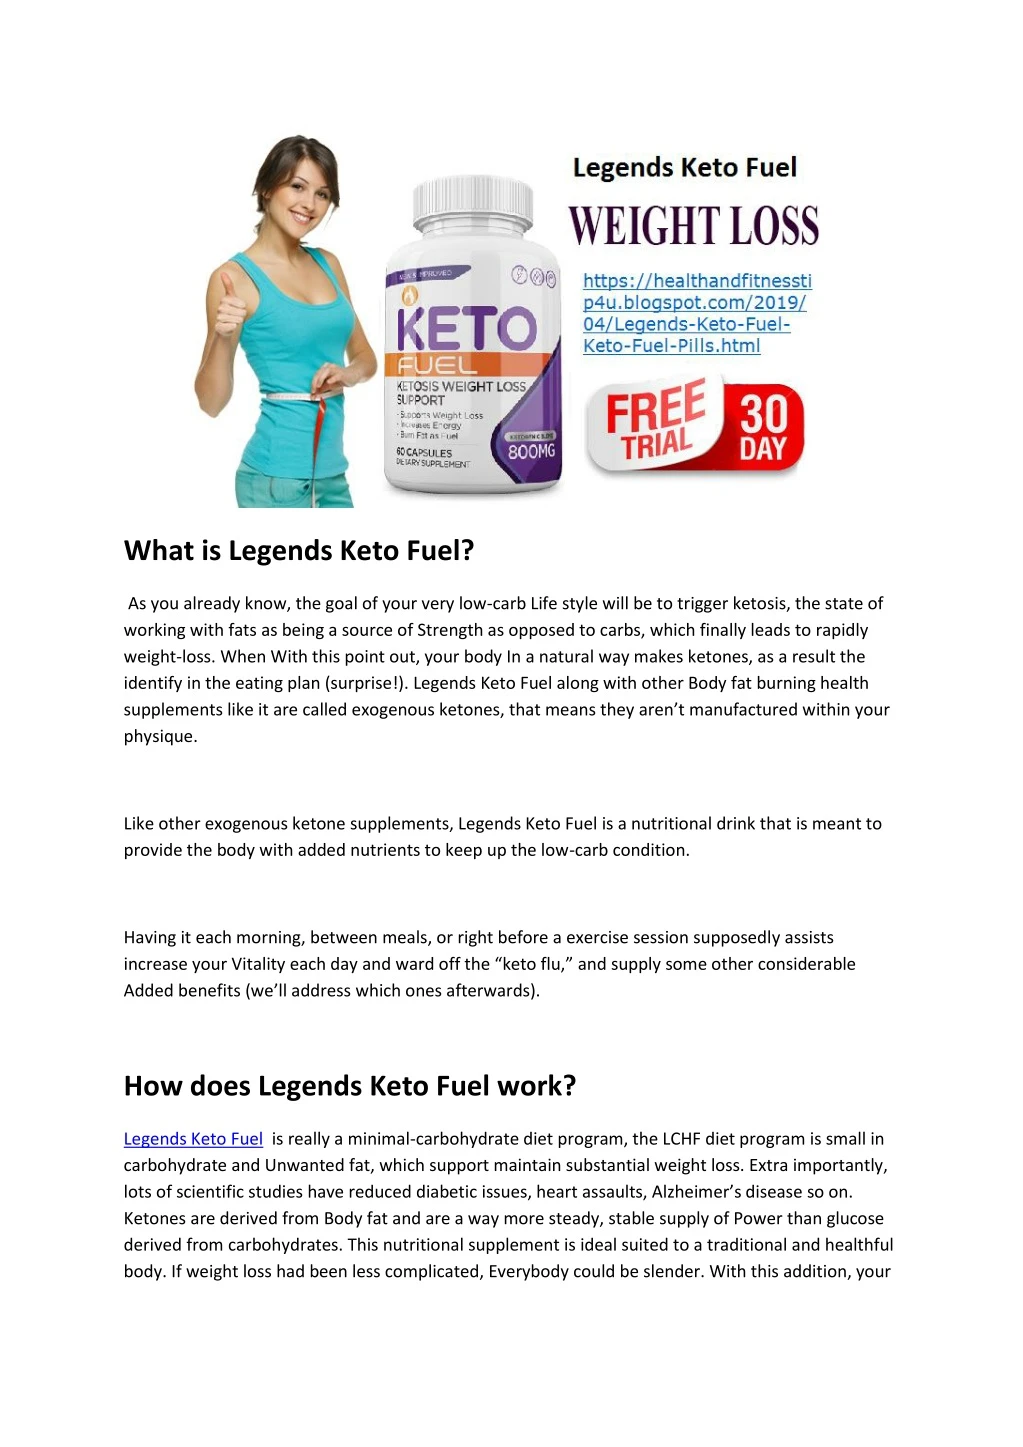 what is legends keto fuel